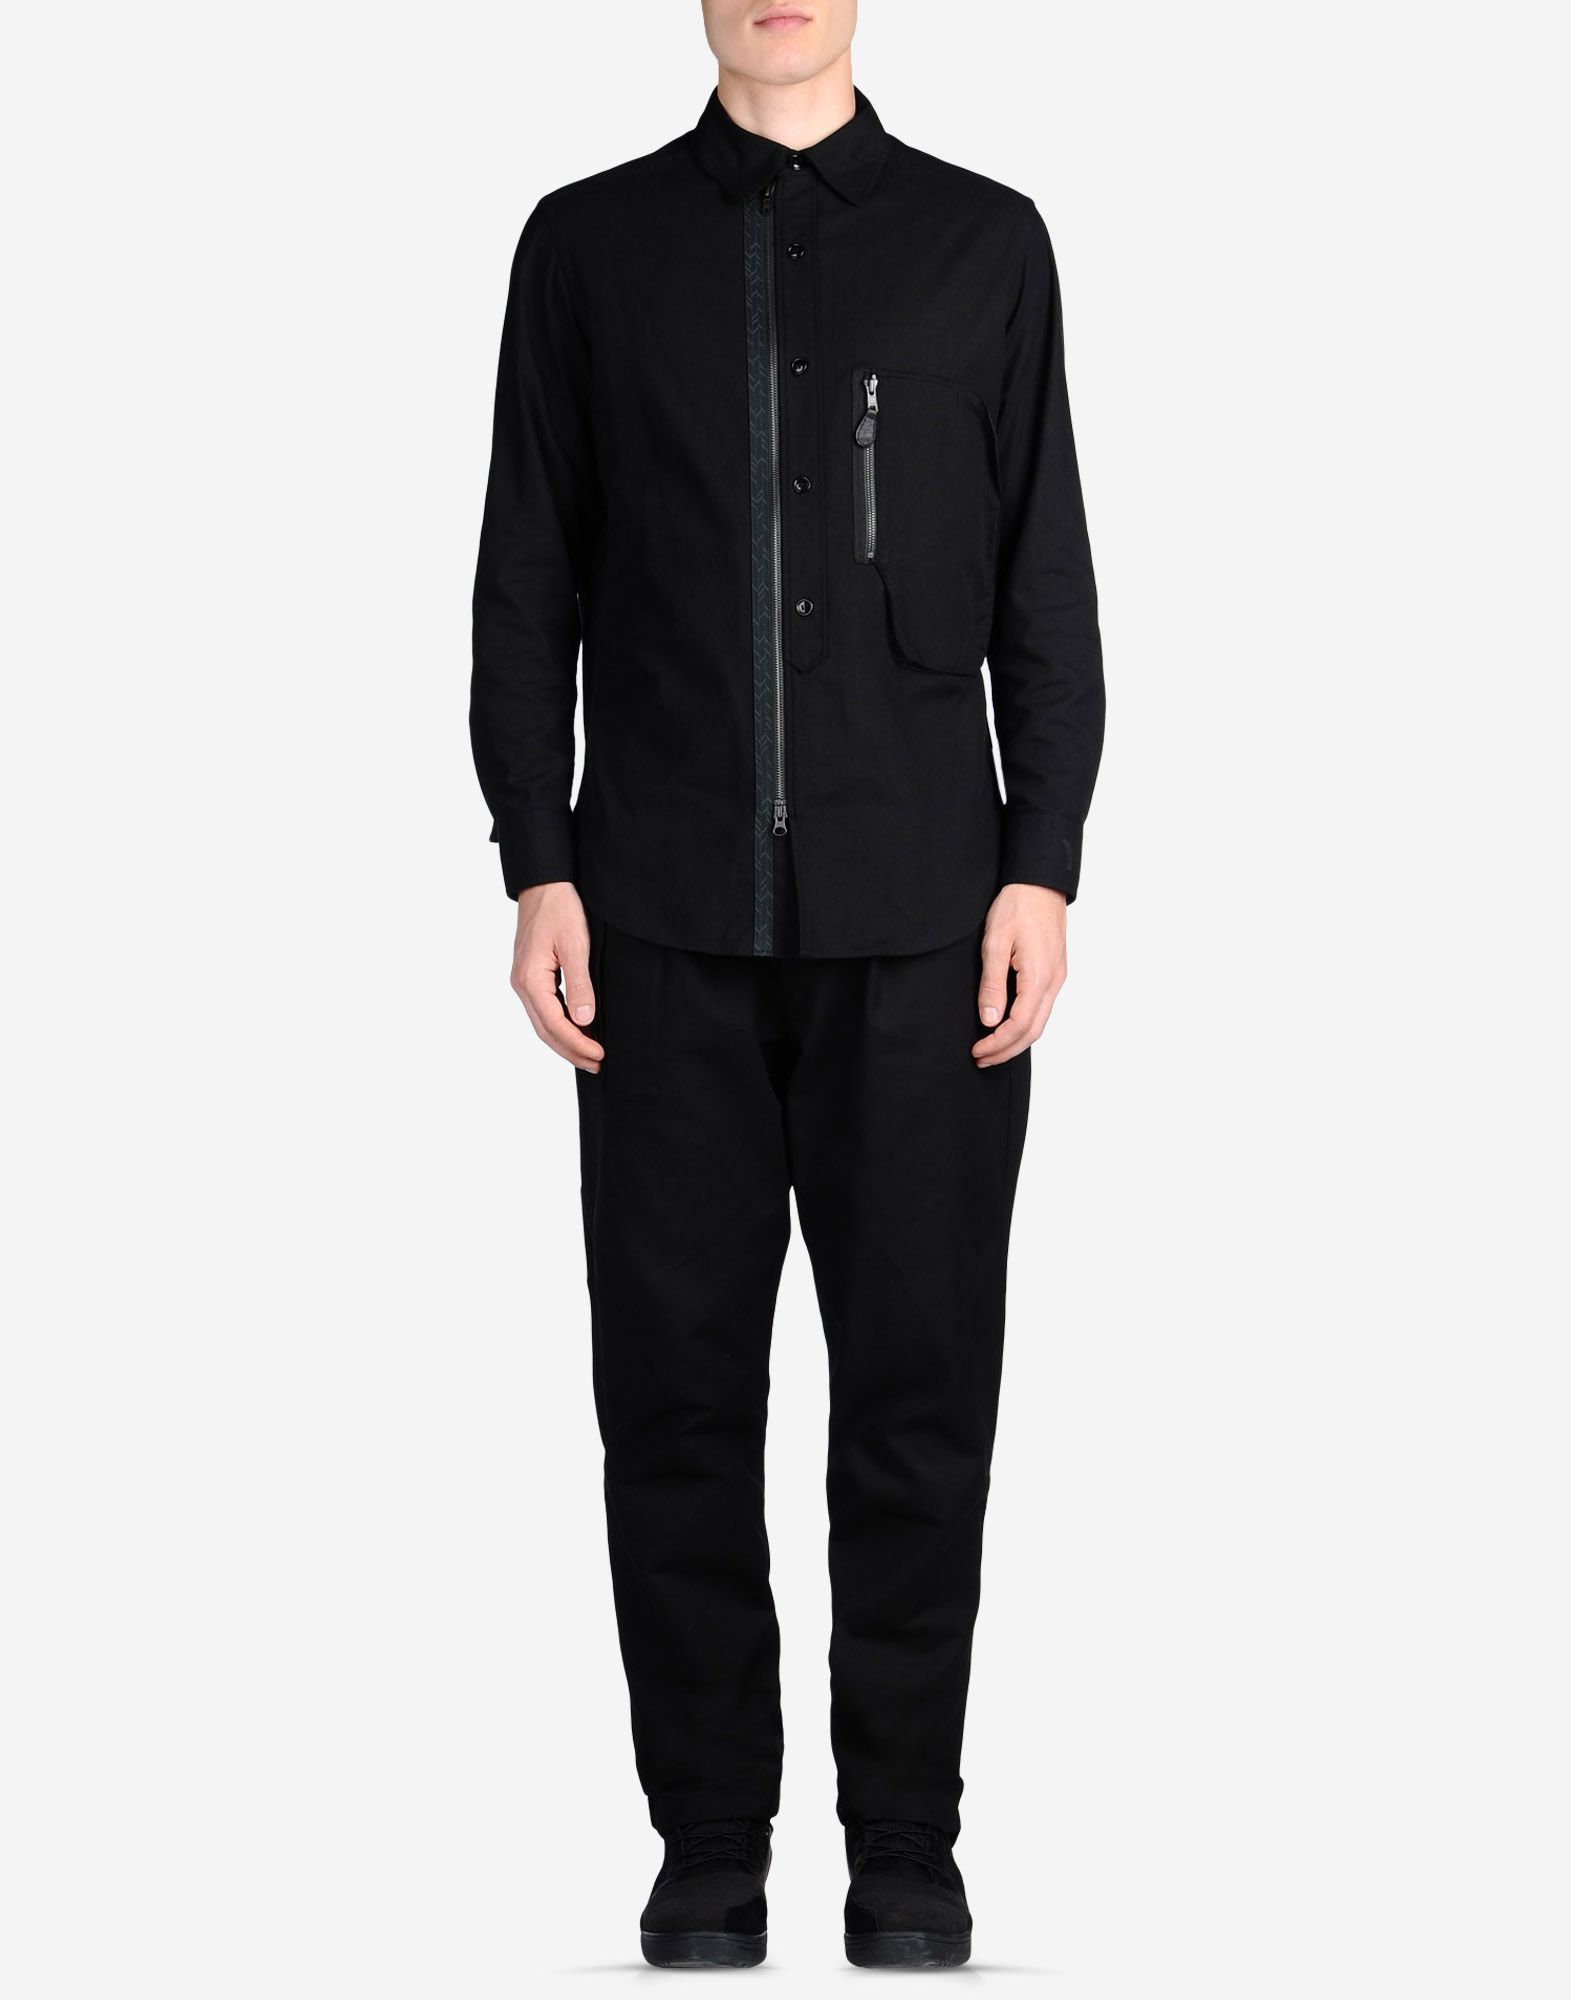 Y 3 PARADE PANT for Men | Adidas Y-3 Official Store